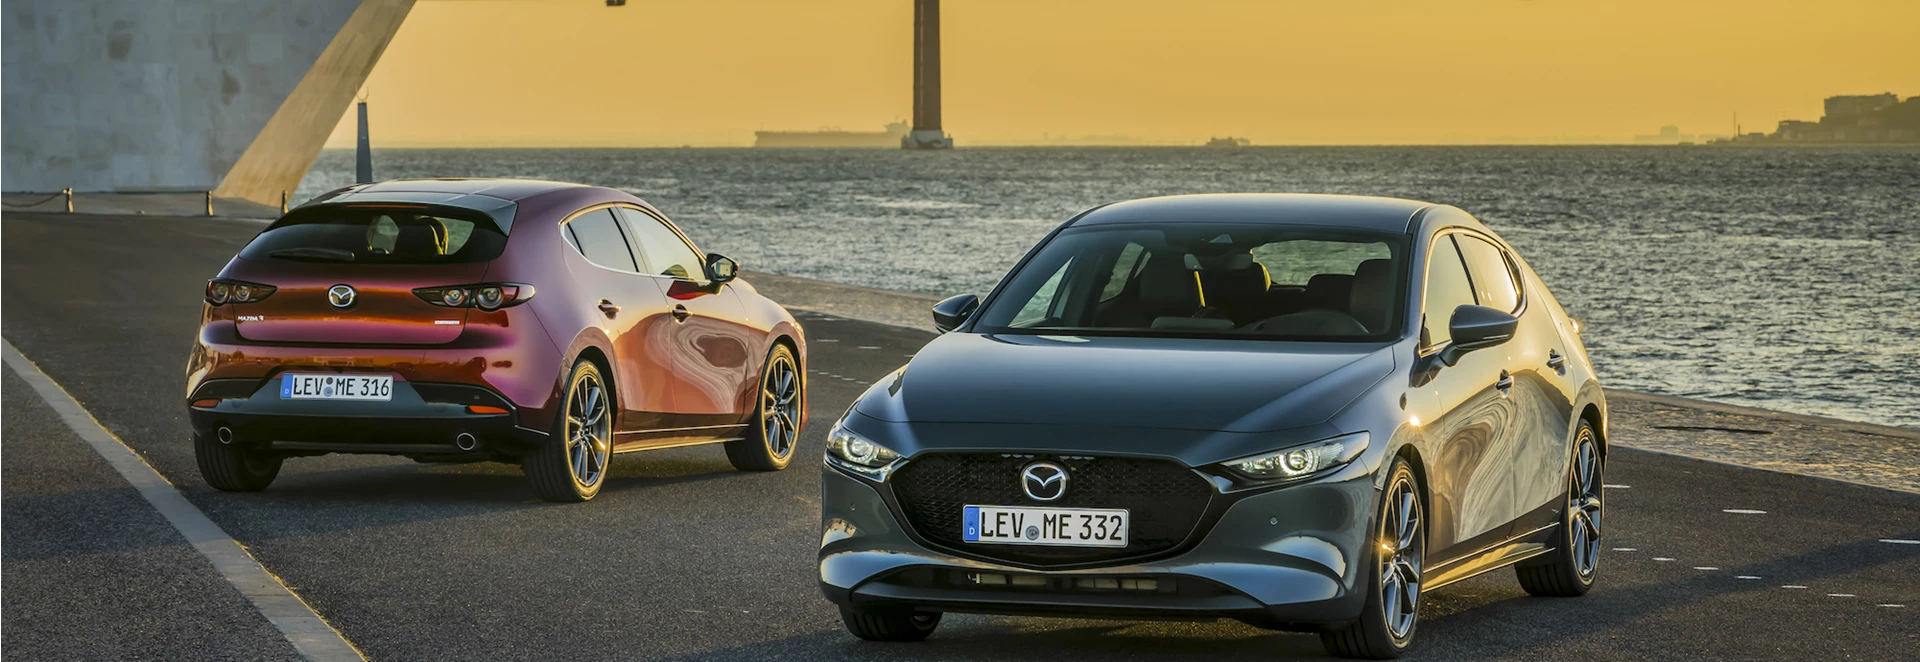 Five standout features on the new Mazda3